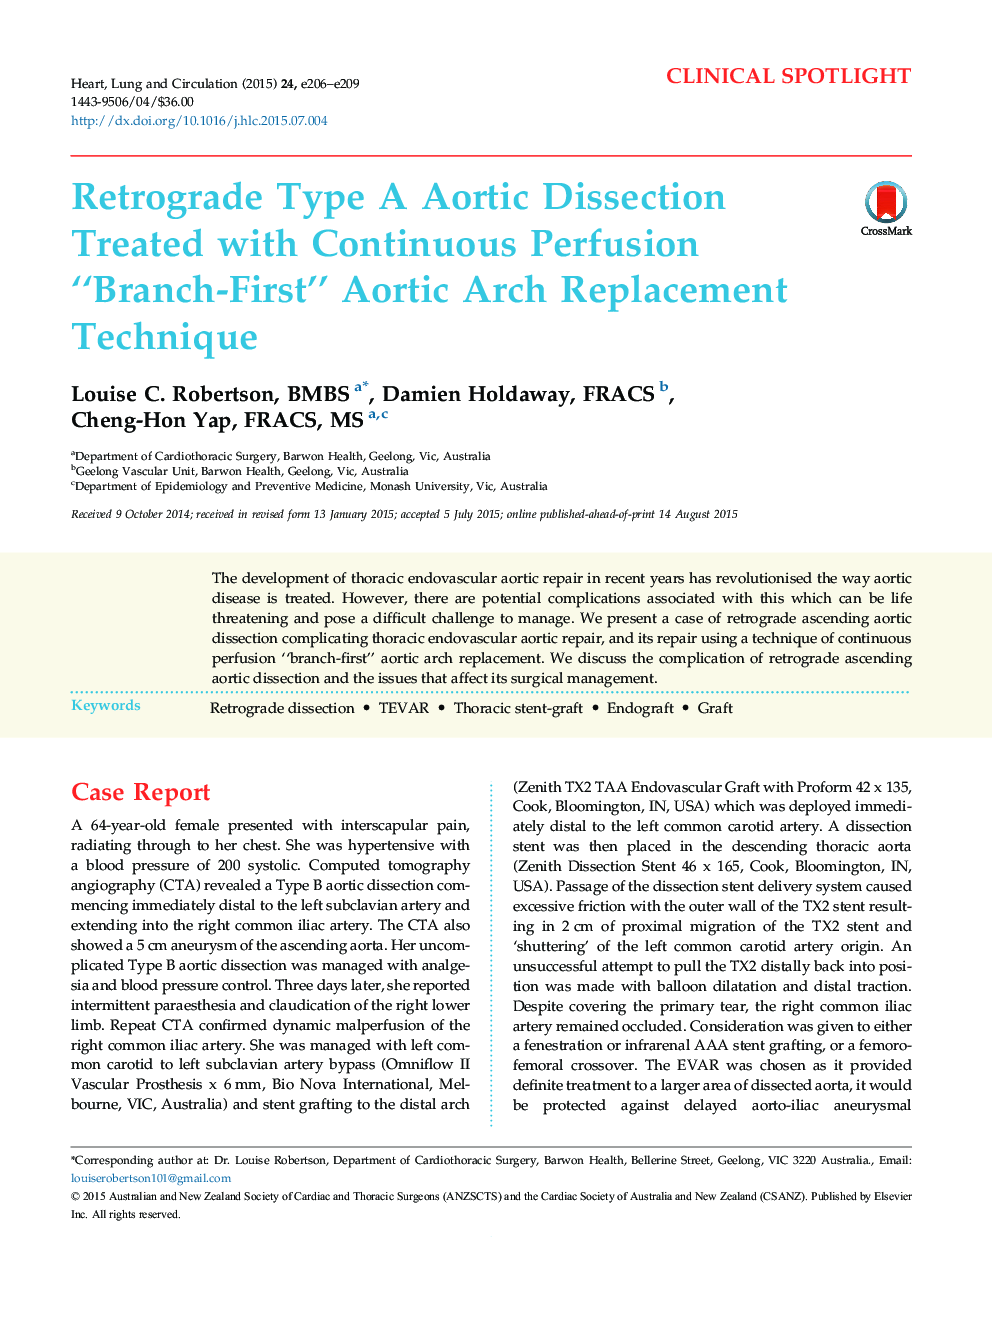 Retrograde Type A Aortic Dissection Treated with Continuous Perfusion “Branch-First” Aortic Arch Replacement Technique